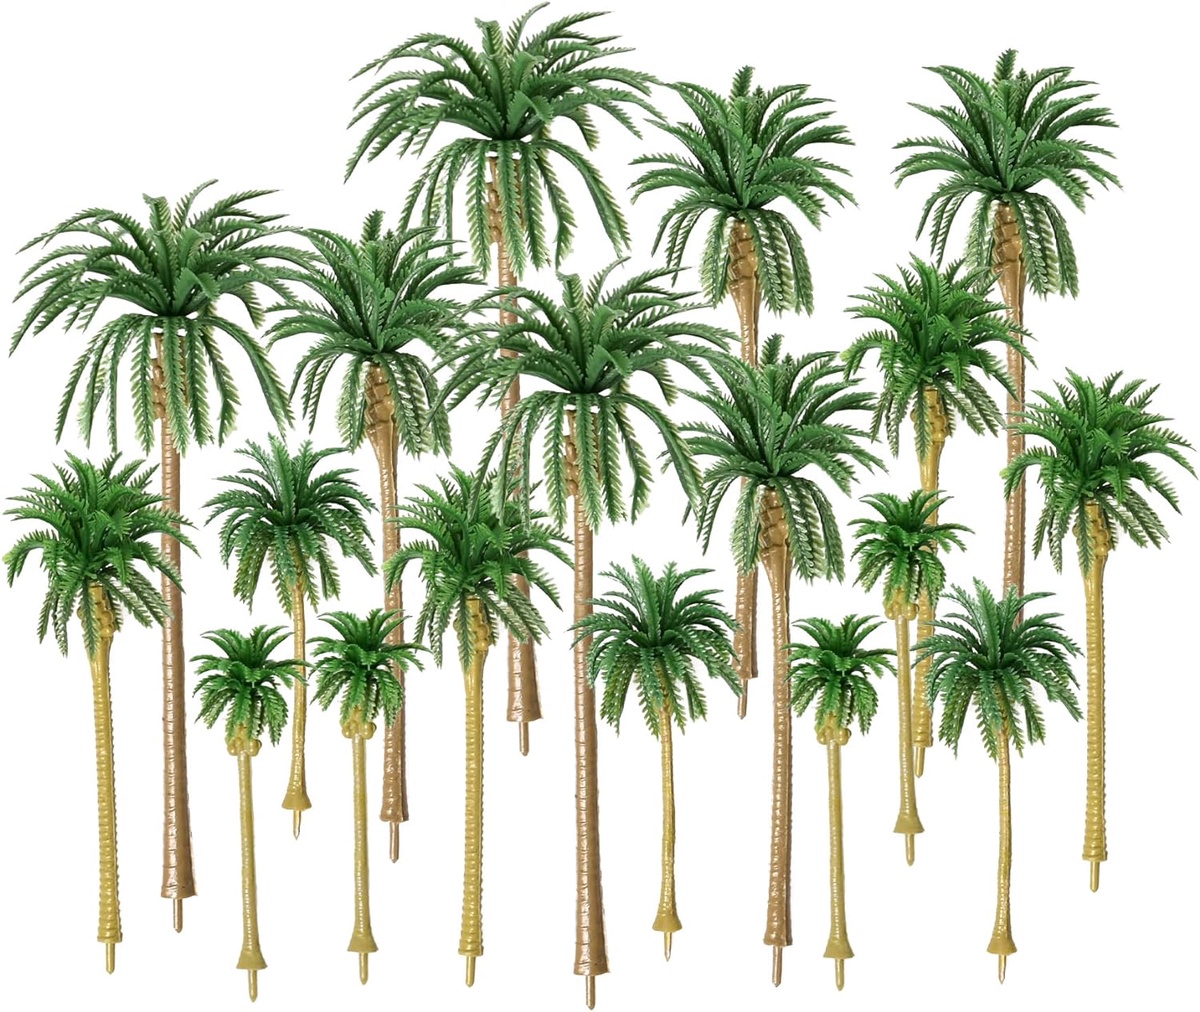 Exploring Palm Tree Varieties Available from Suppliers in Saudi Arabia